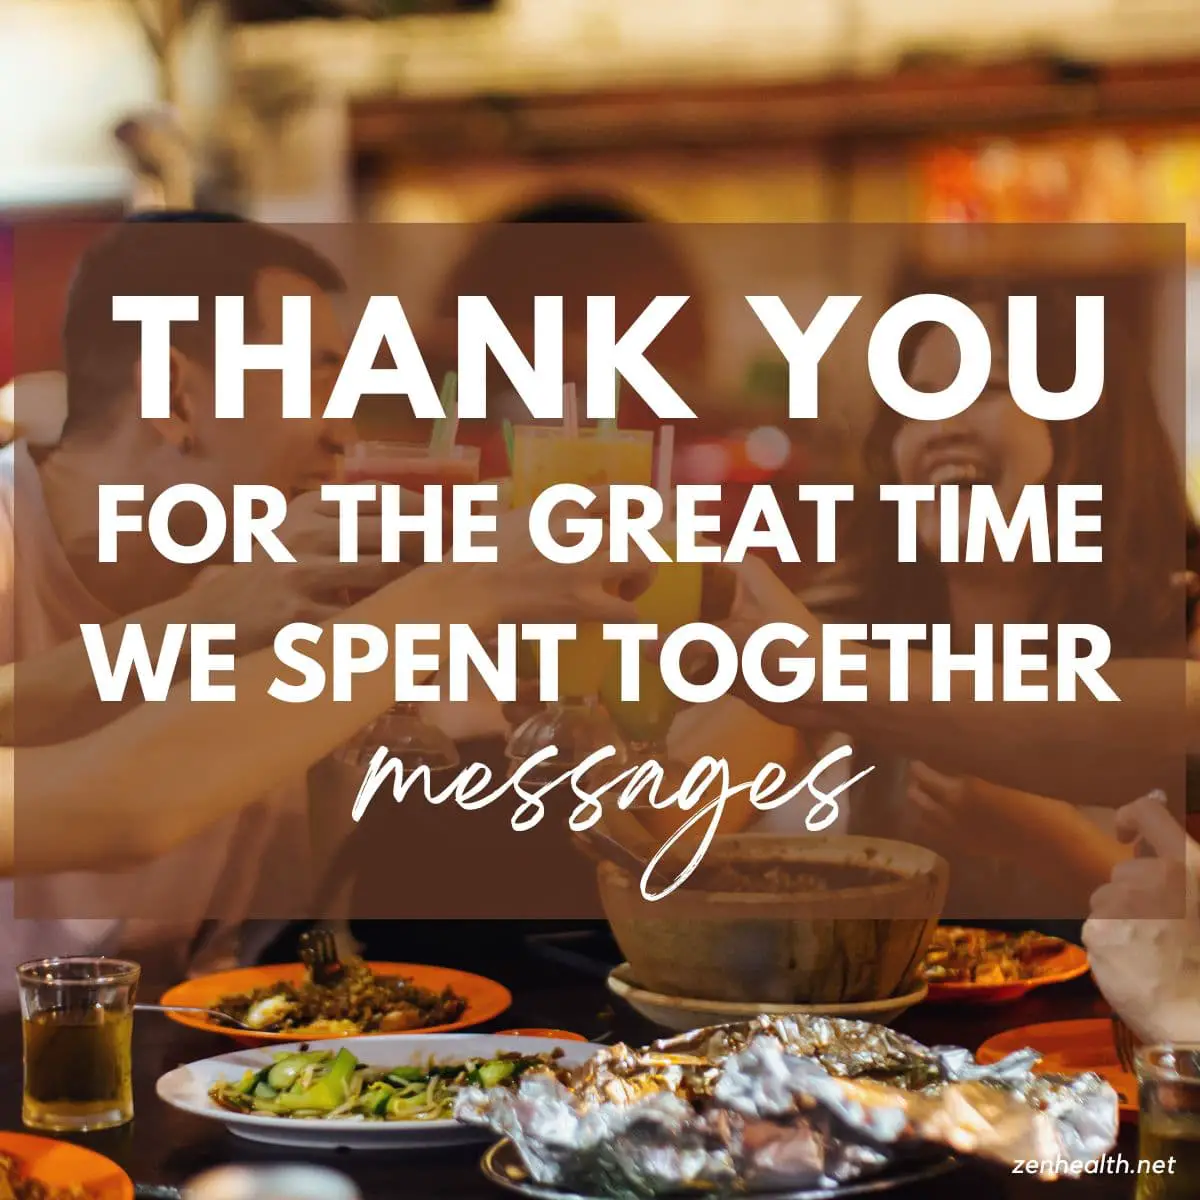 thank you for the great time we spent together messages text overlay on a photo of people with drinks in their hands and food on the table